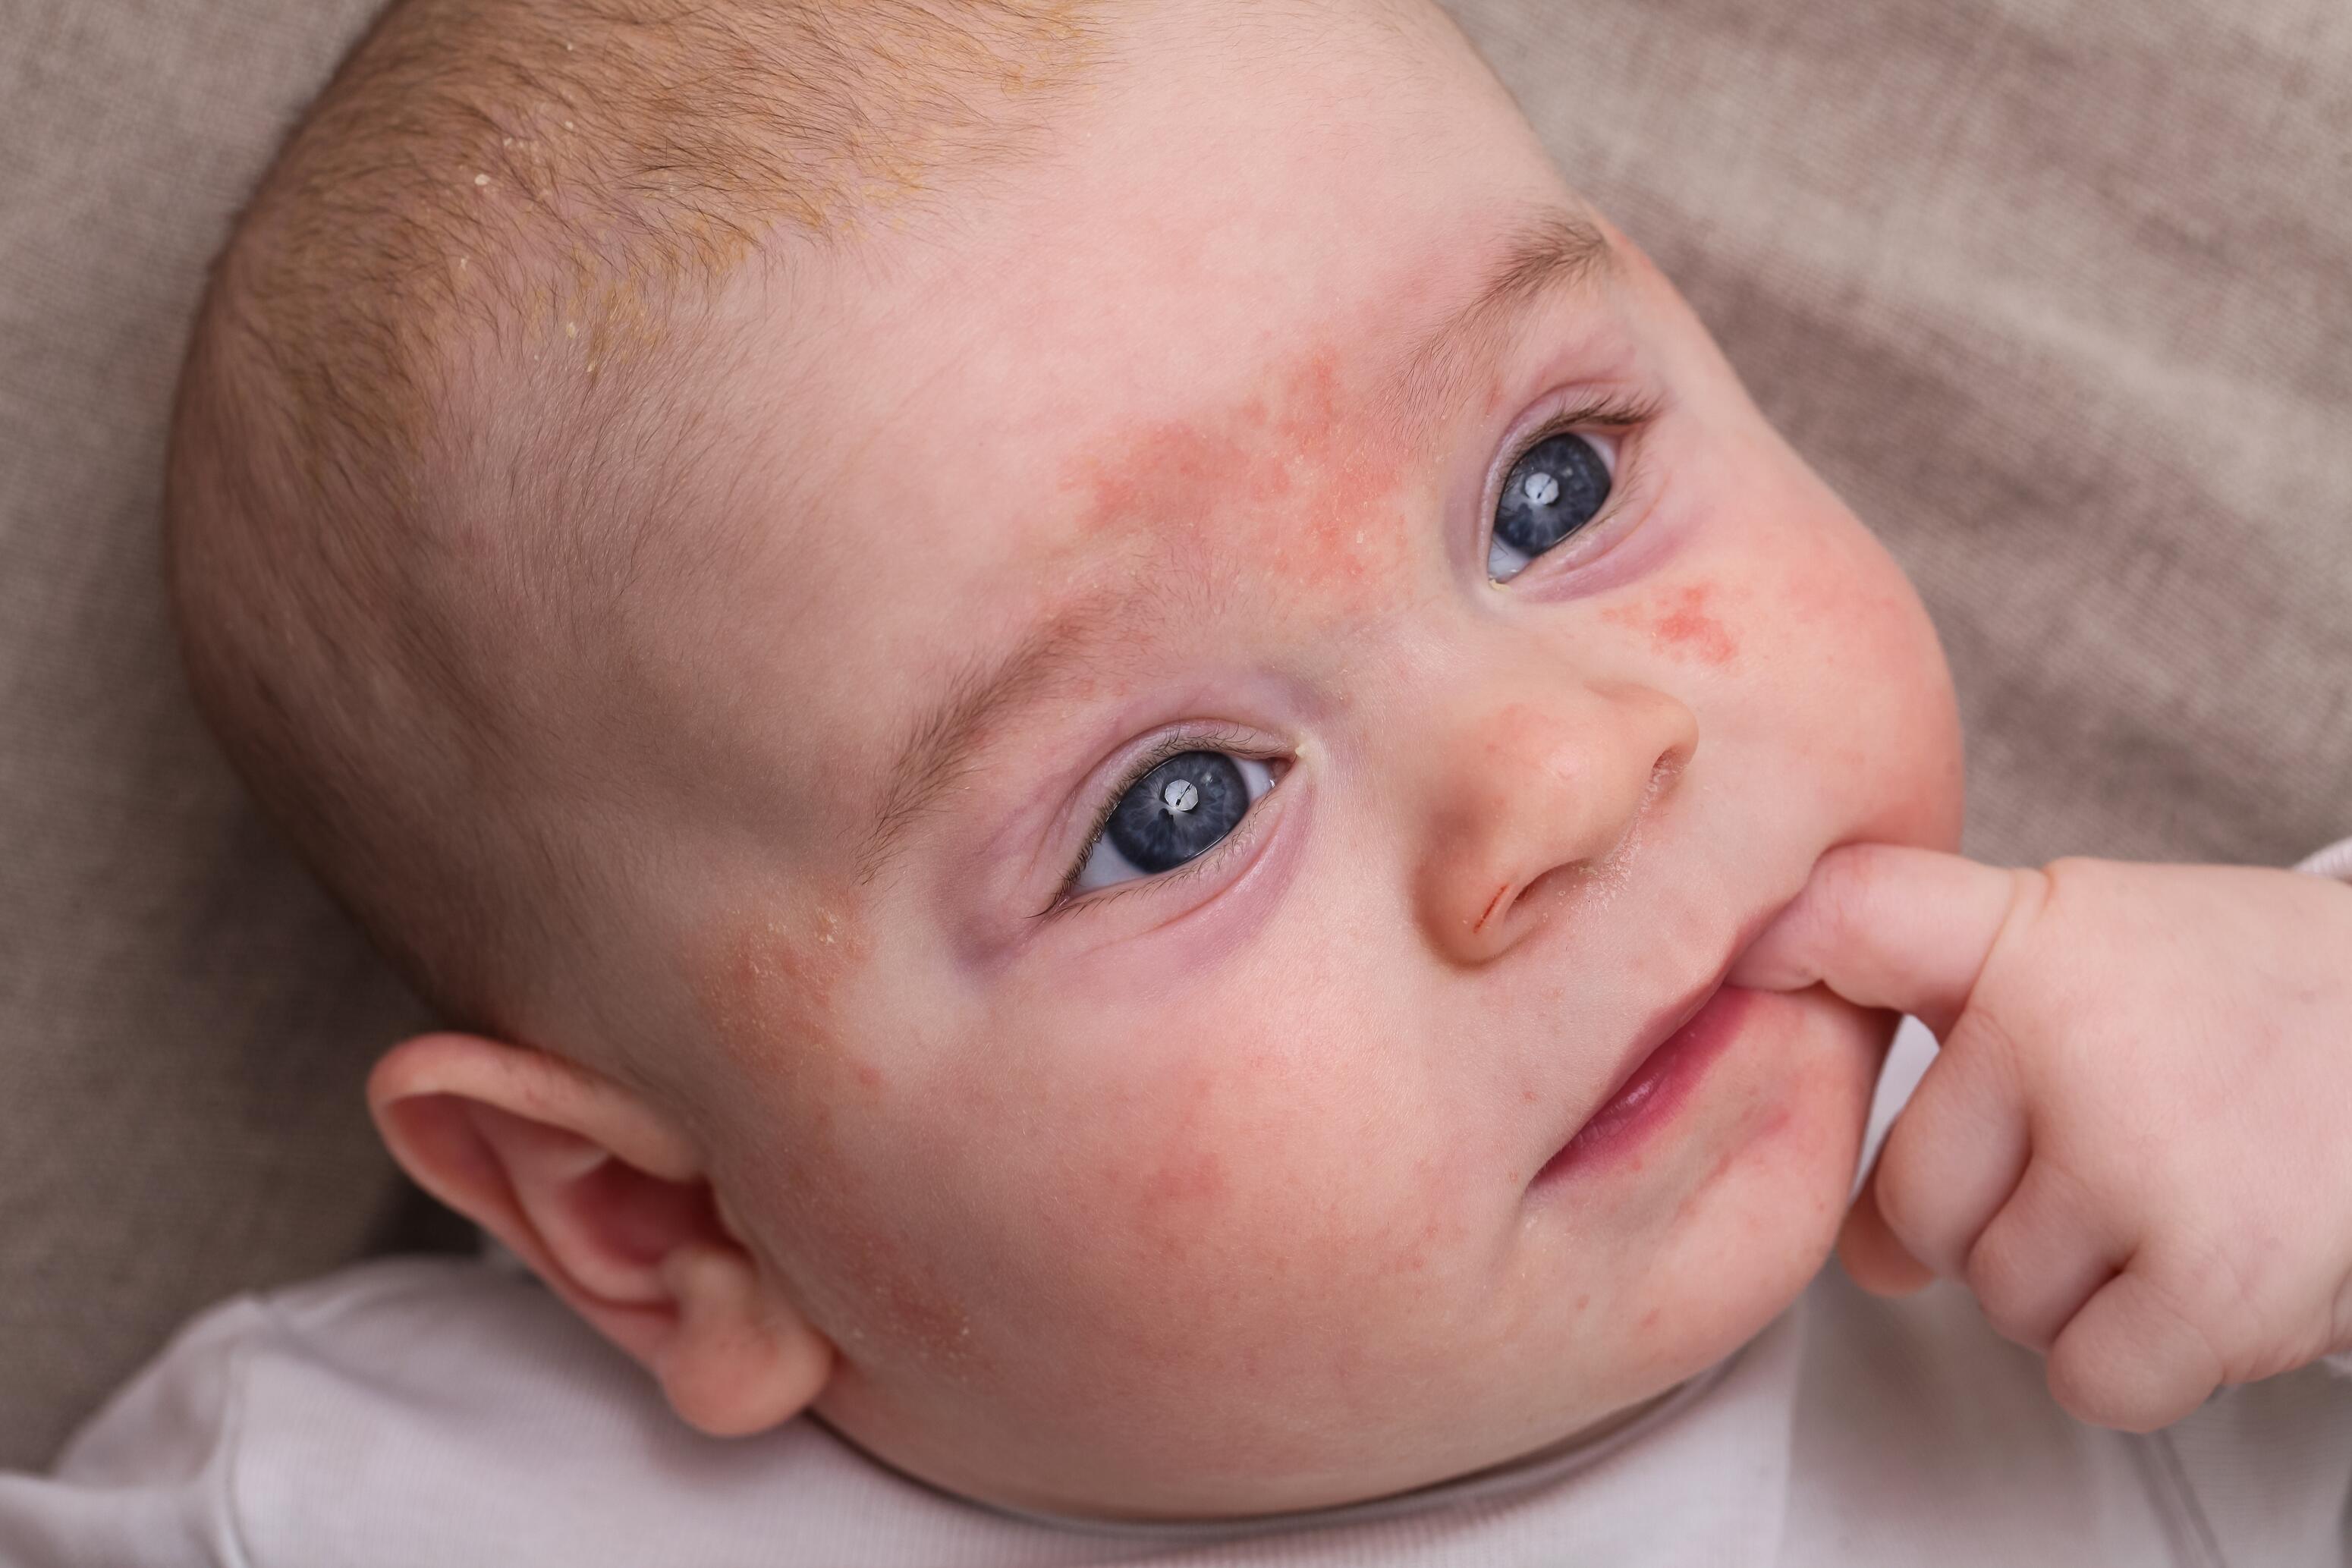 Infant with eczema on the face